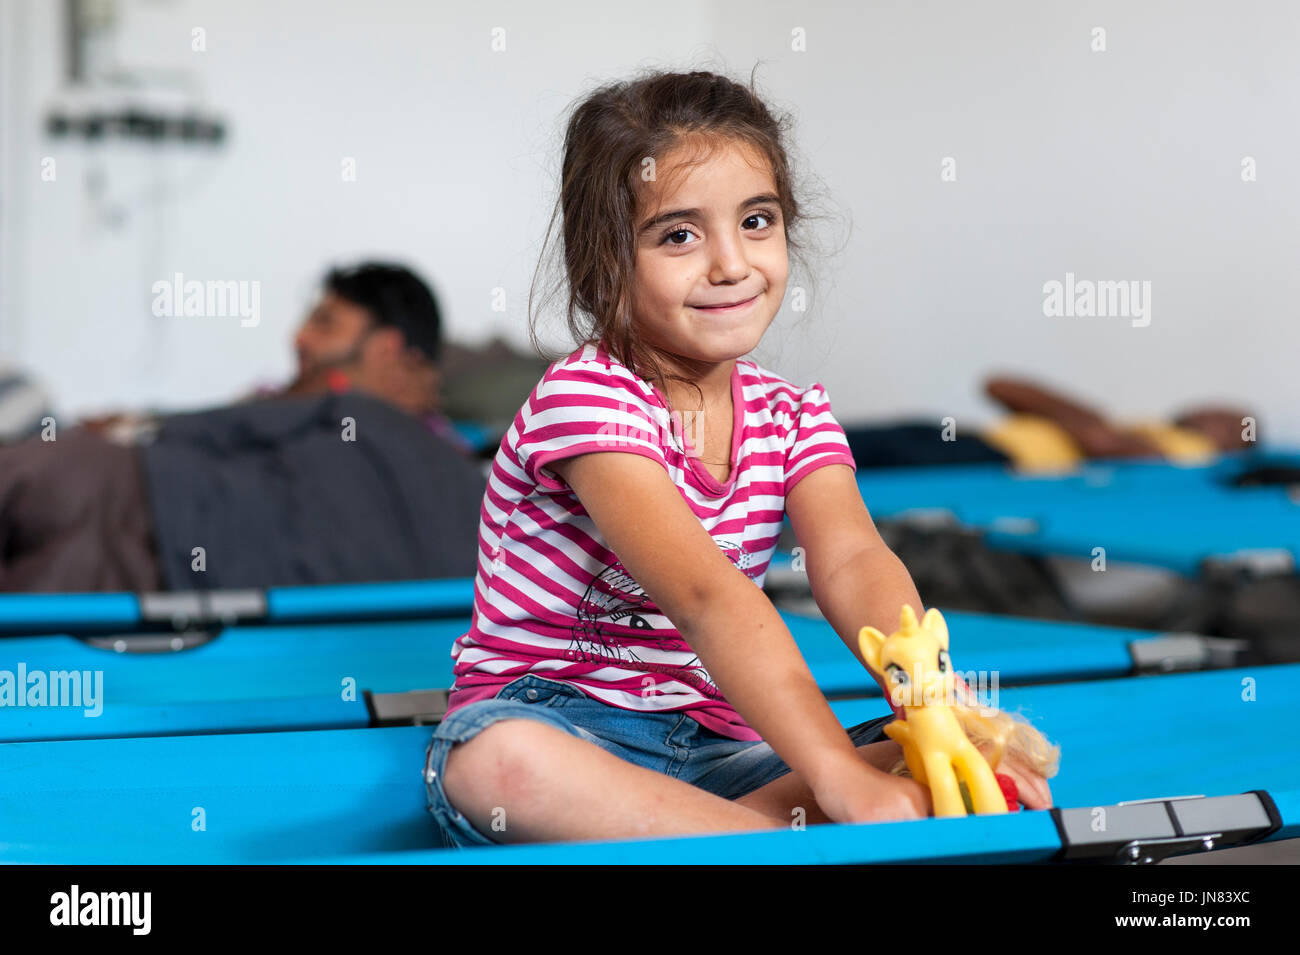 Passau, Germany - August 1st, 2015: Syrian refugee girl at a camp in Passau, Germany. She is happy to arrive in safety after fleeing from civil war. Stock Photo